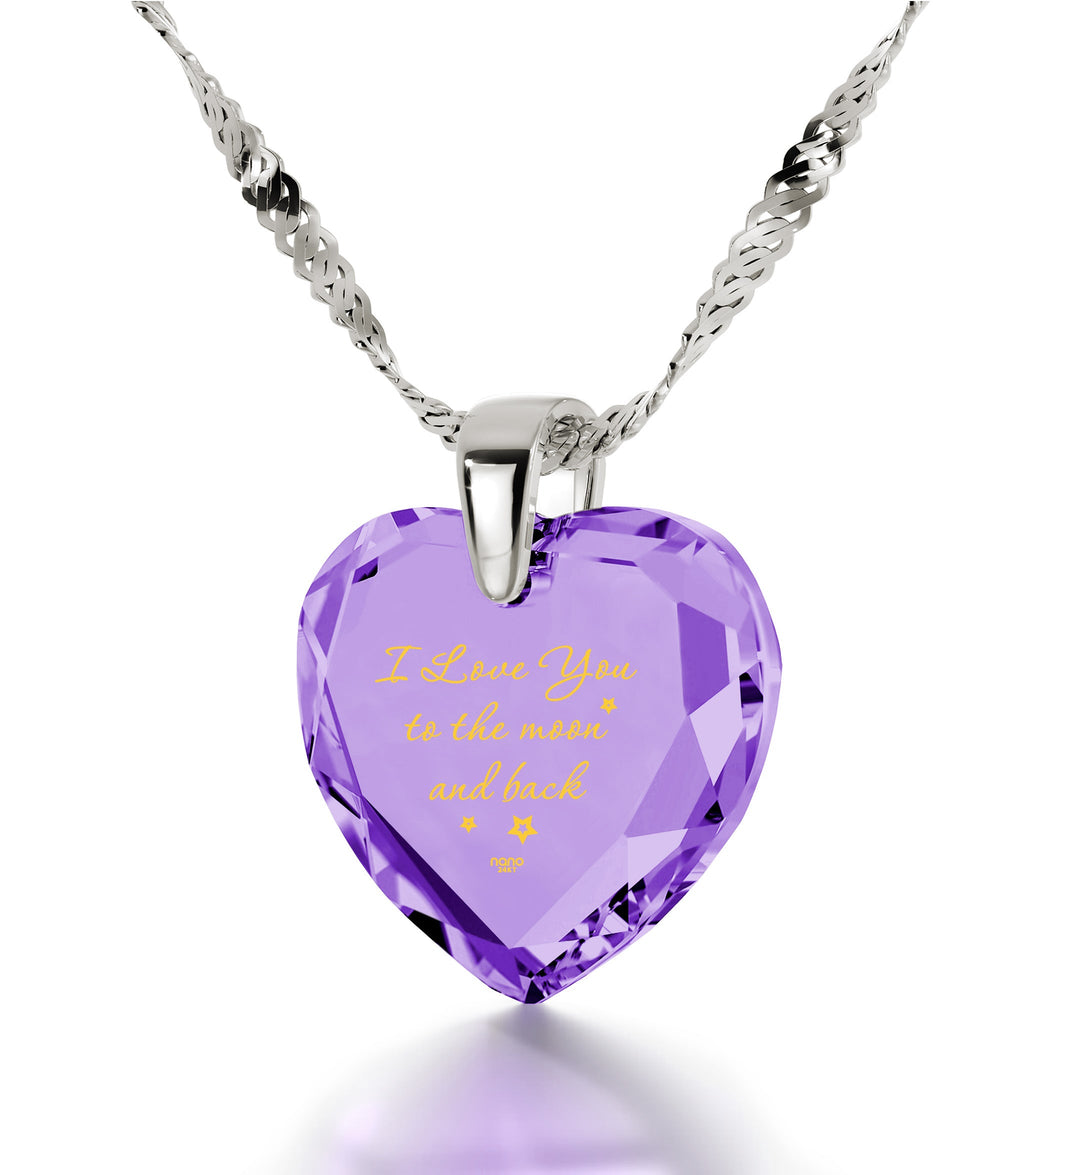 925 Sterling Silver I Love You to The Moon and Back Necklace 24k Gold Inscribed Heart Cubic Zirconia Pendant